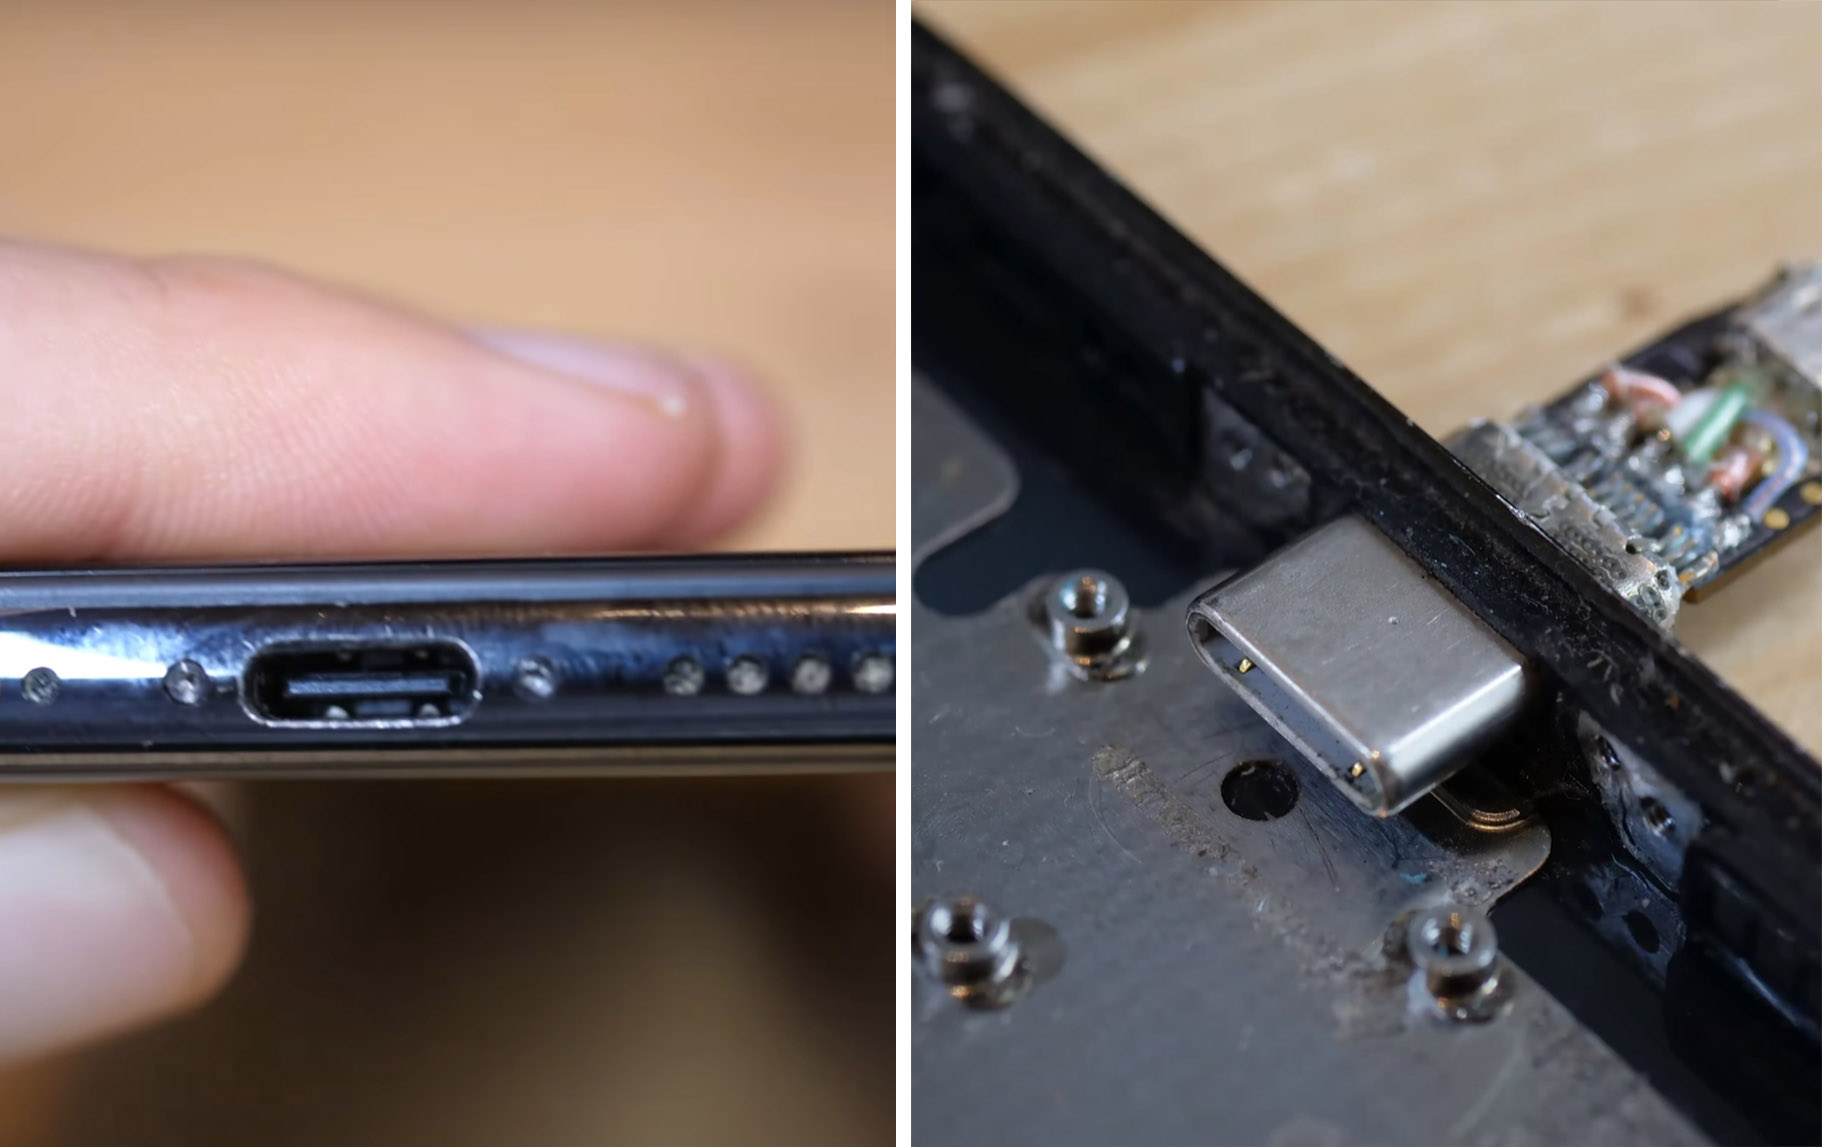 linear magnification Chewing gum The USB-C iPhone becomes a reality thanks to a robotics engineer |  TechCrunch